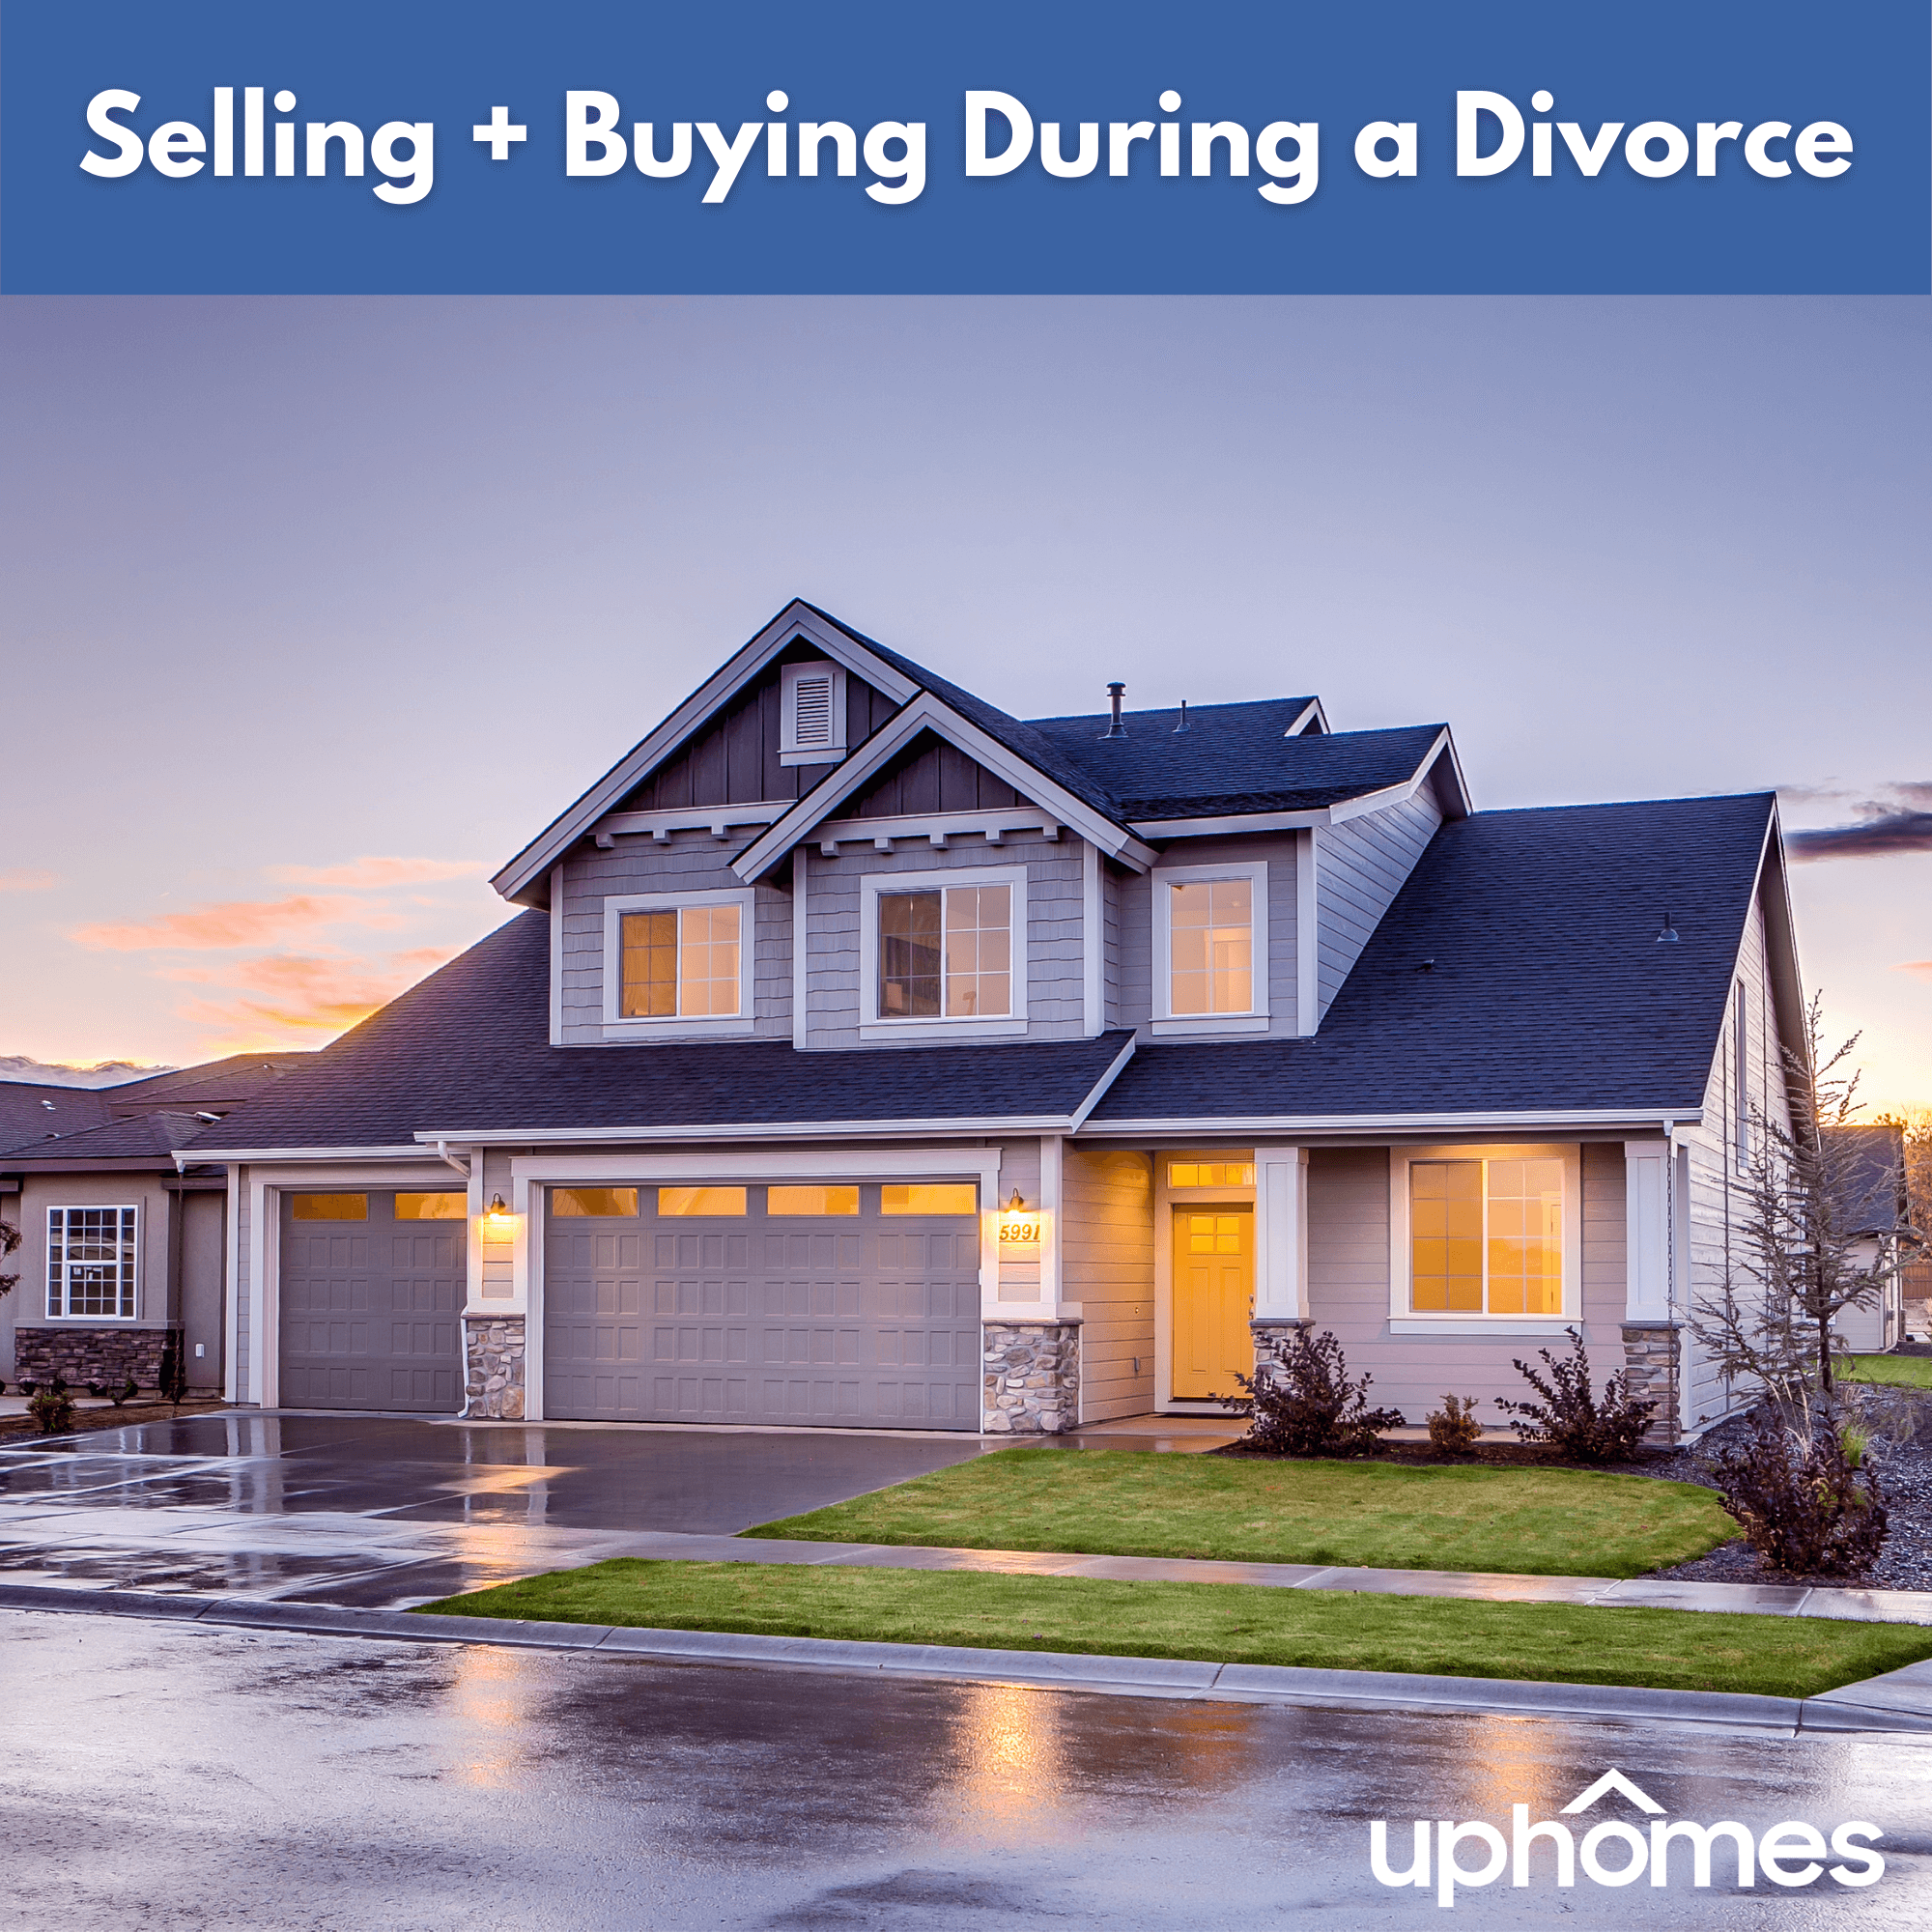 Selling and Buying a Home During a Divorce